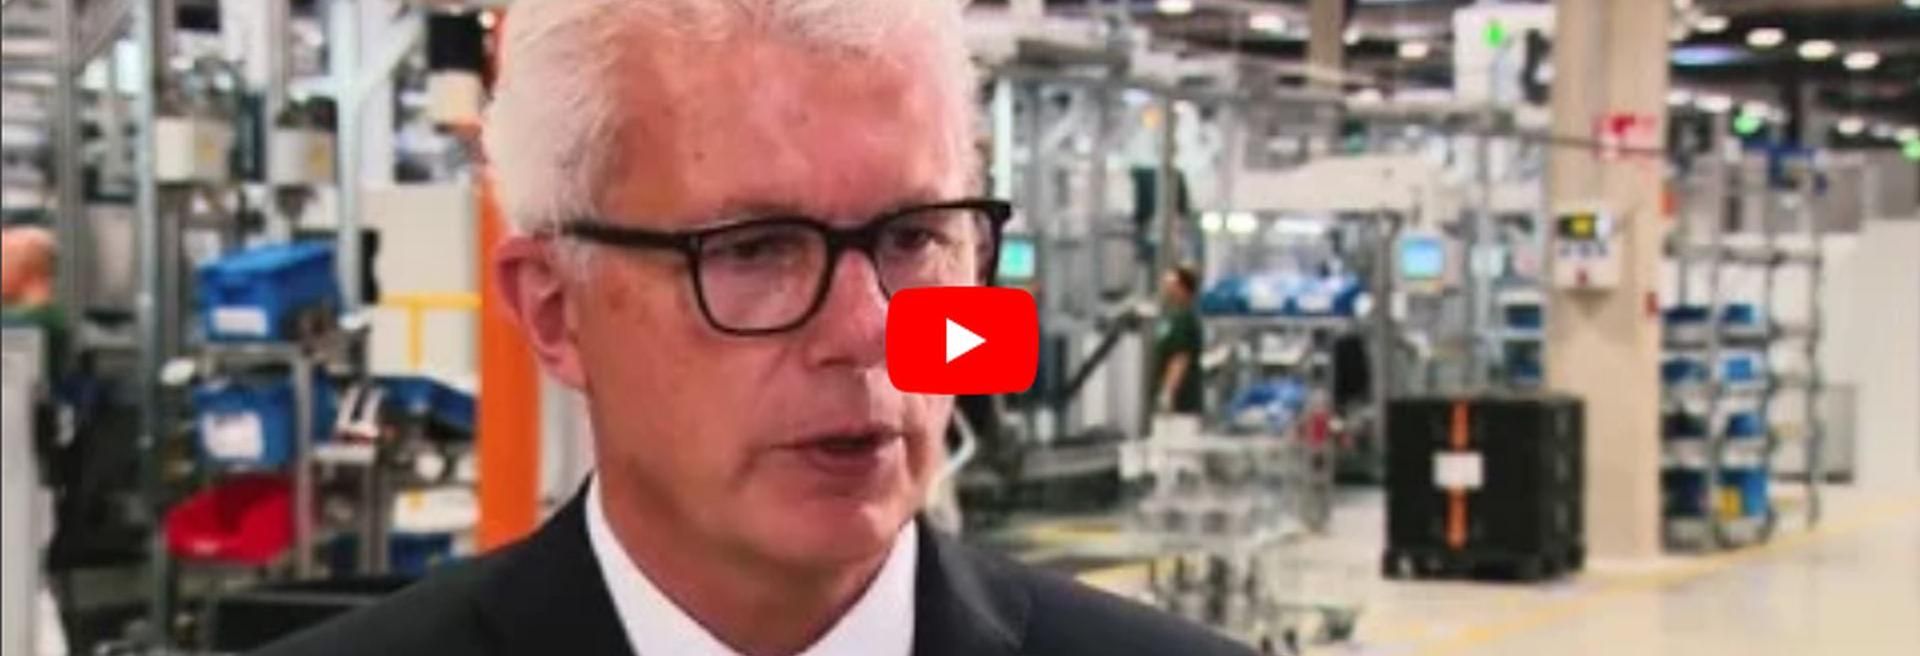 ZF expanded to manufacture an automotive product success in Hungary - VIDEO REPORT